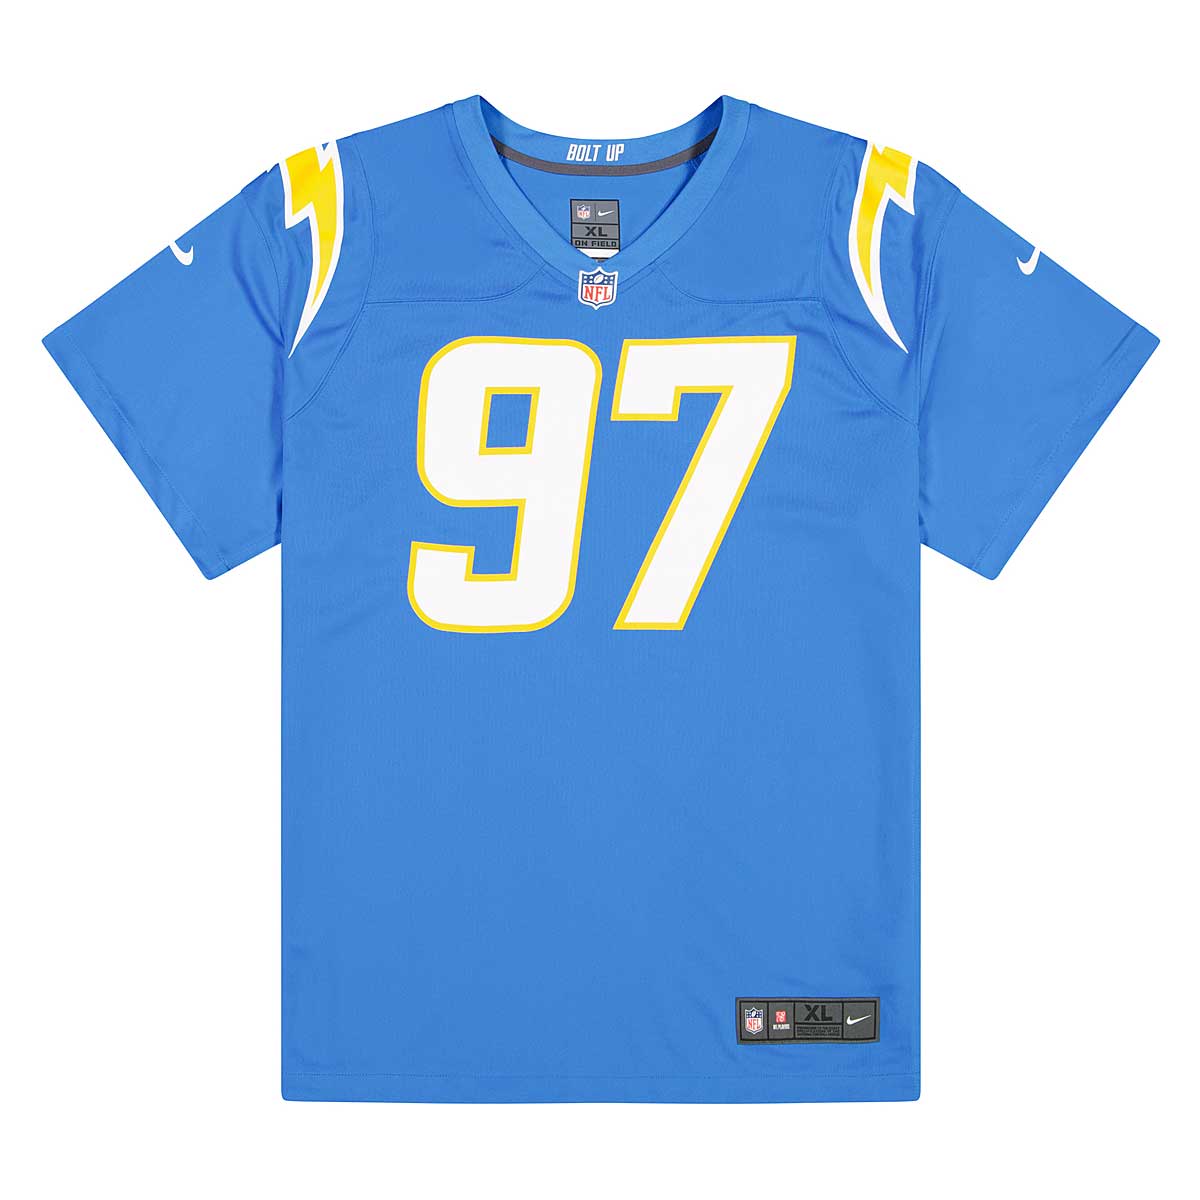 Fanatics Nfl Los Angeles Chargers Blue Bosa 97, Italy Blue